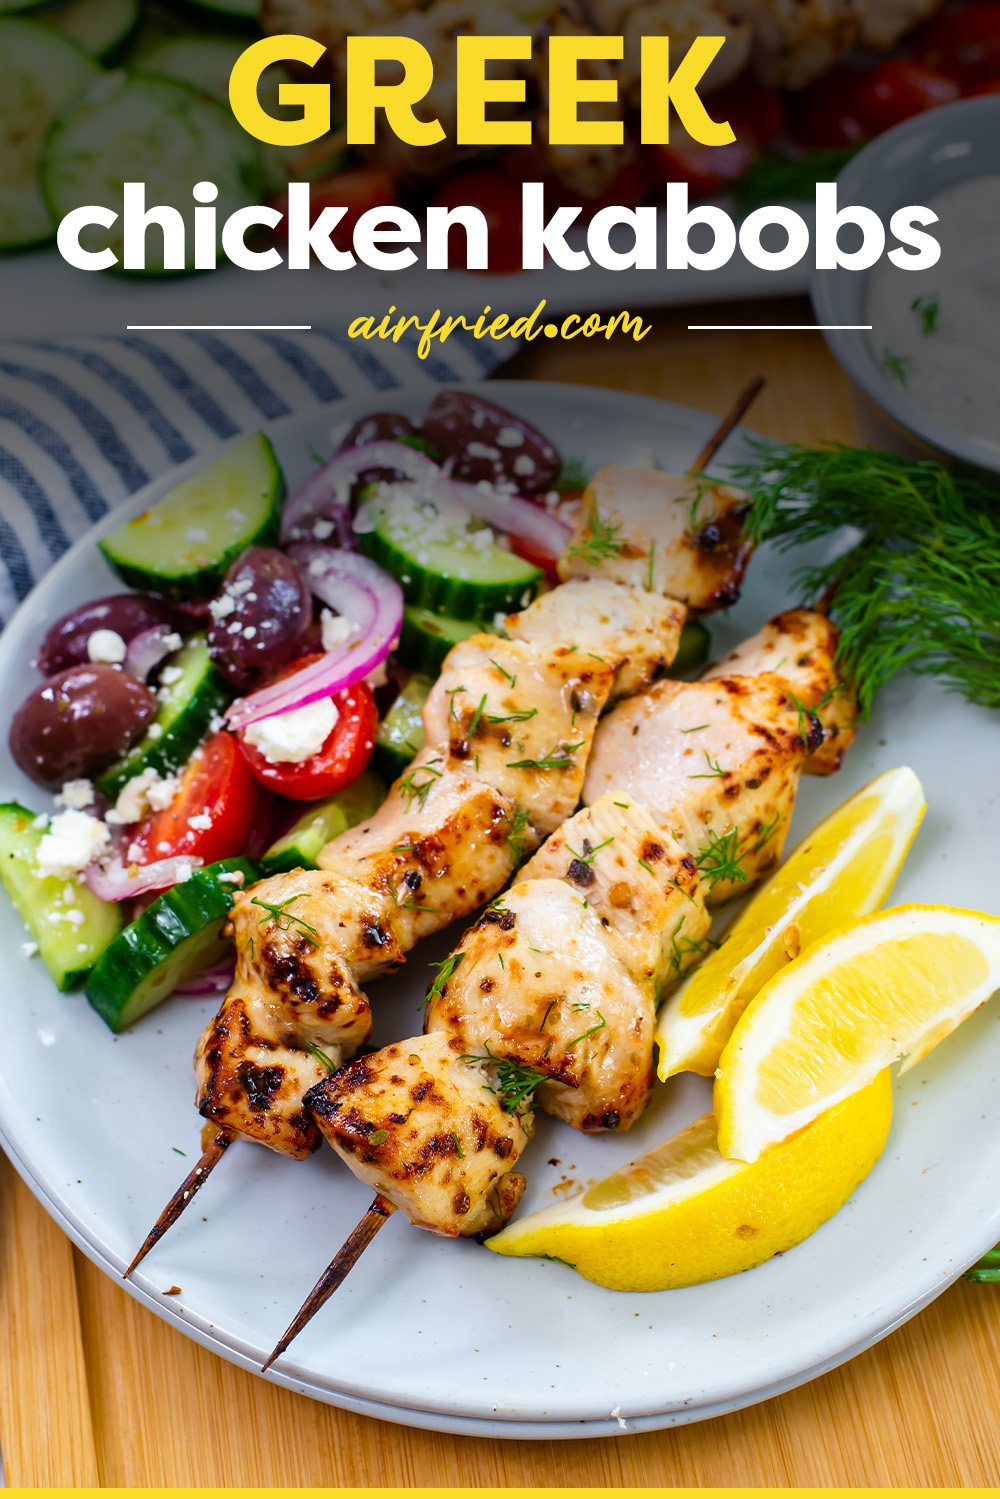 Two Greek chicken kabobs on a plate.